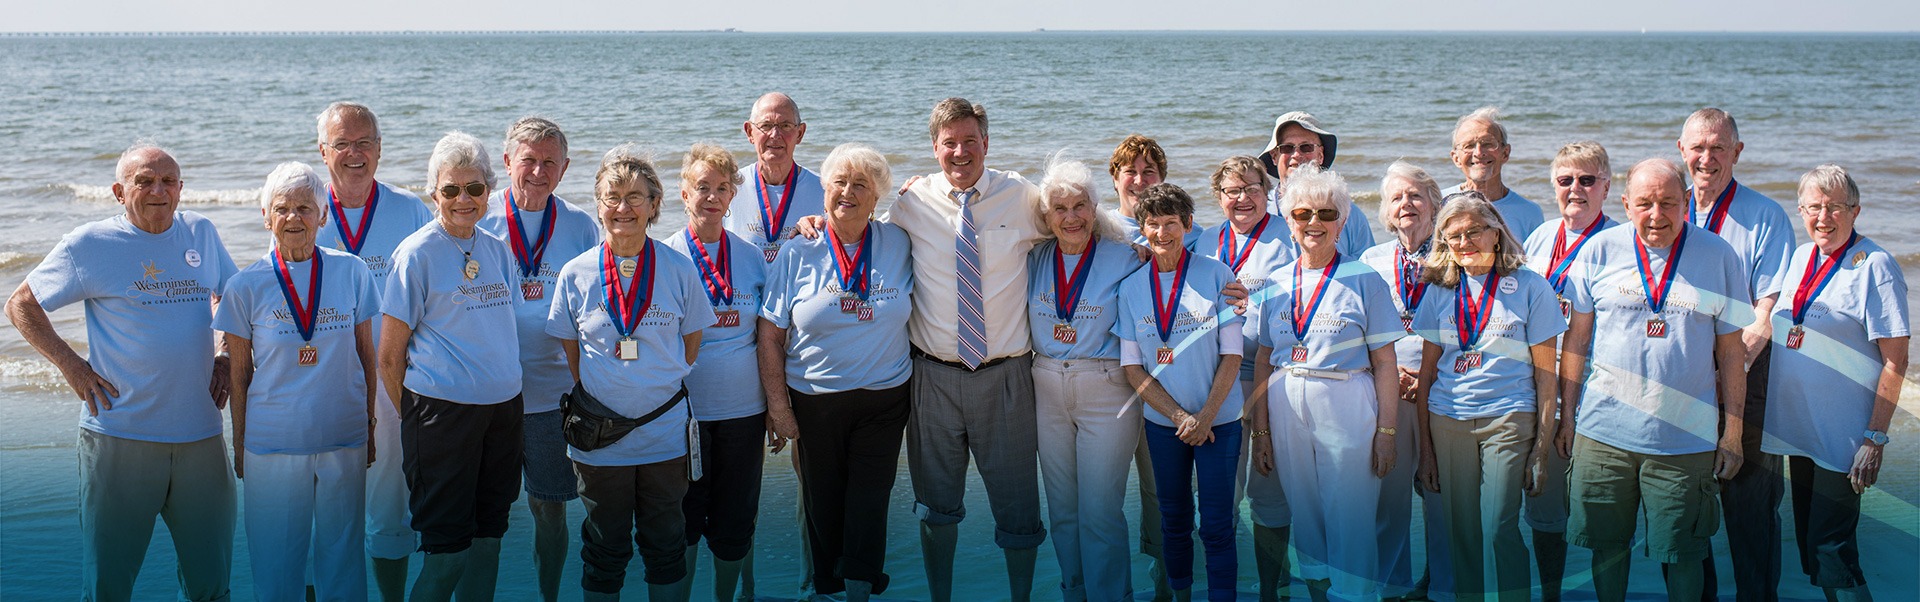 Group of Retired Men and Woman Smiling Together in Front of the Ocean